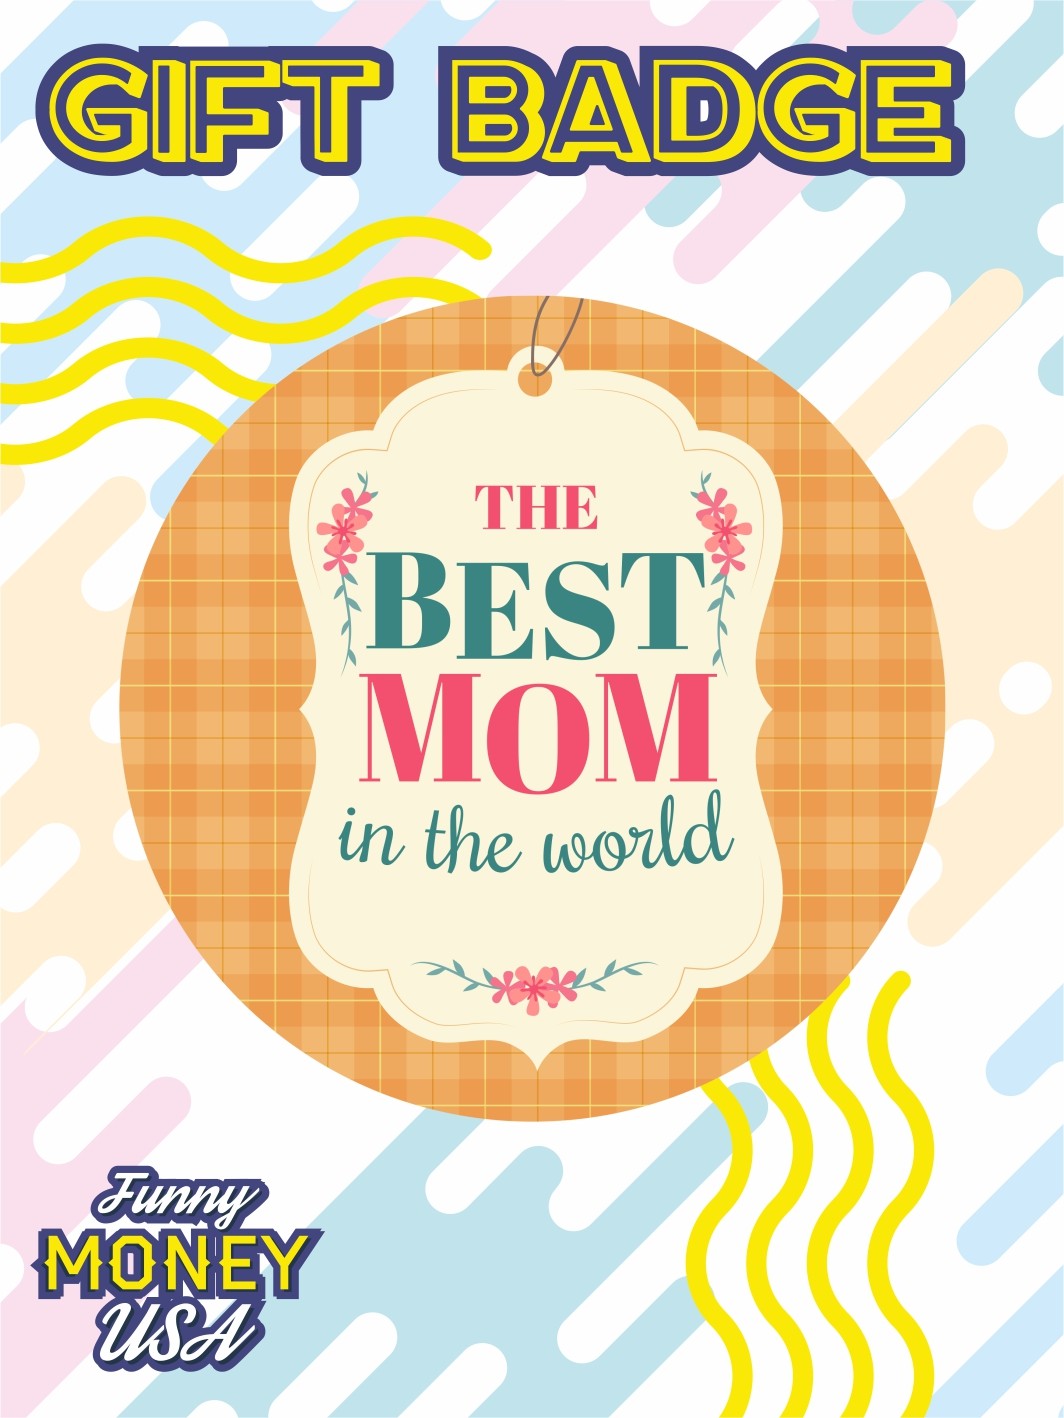 Gift badges "Best Mom in the world"